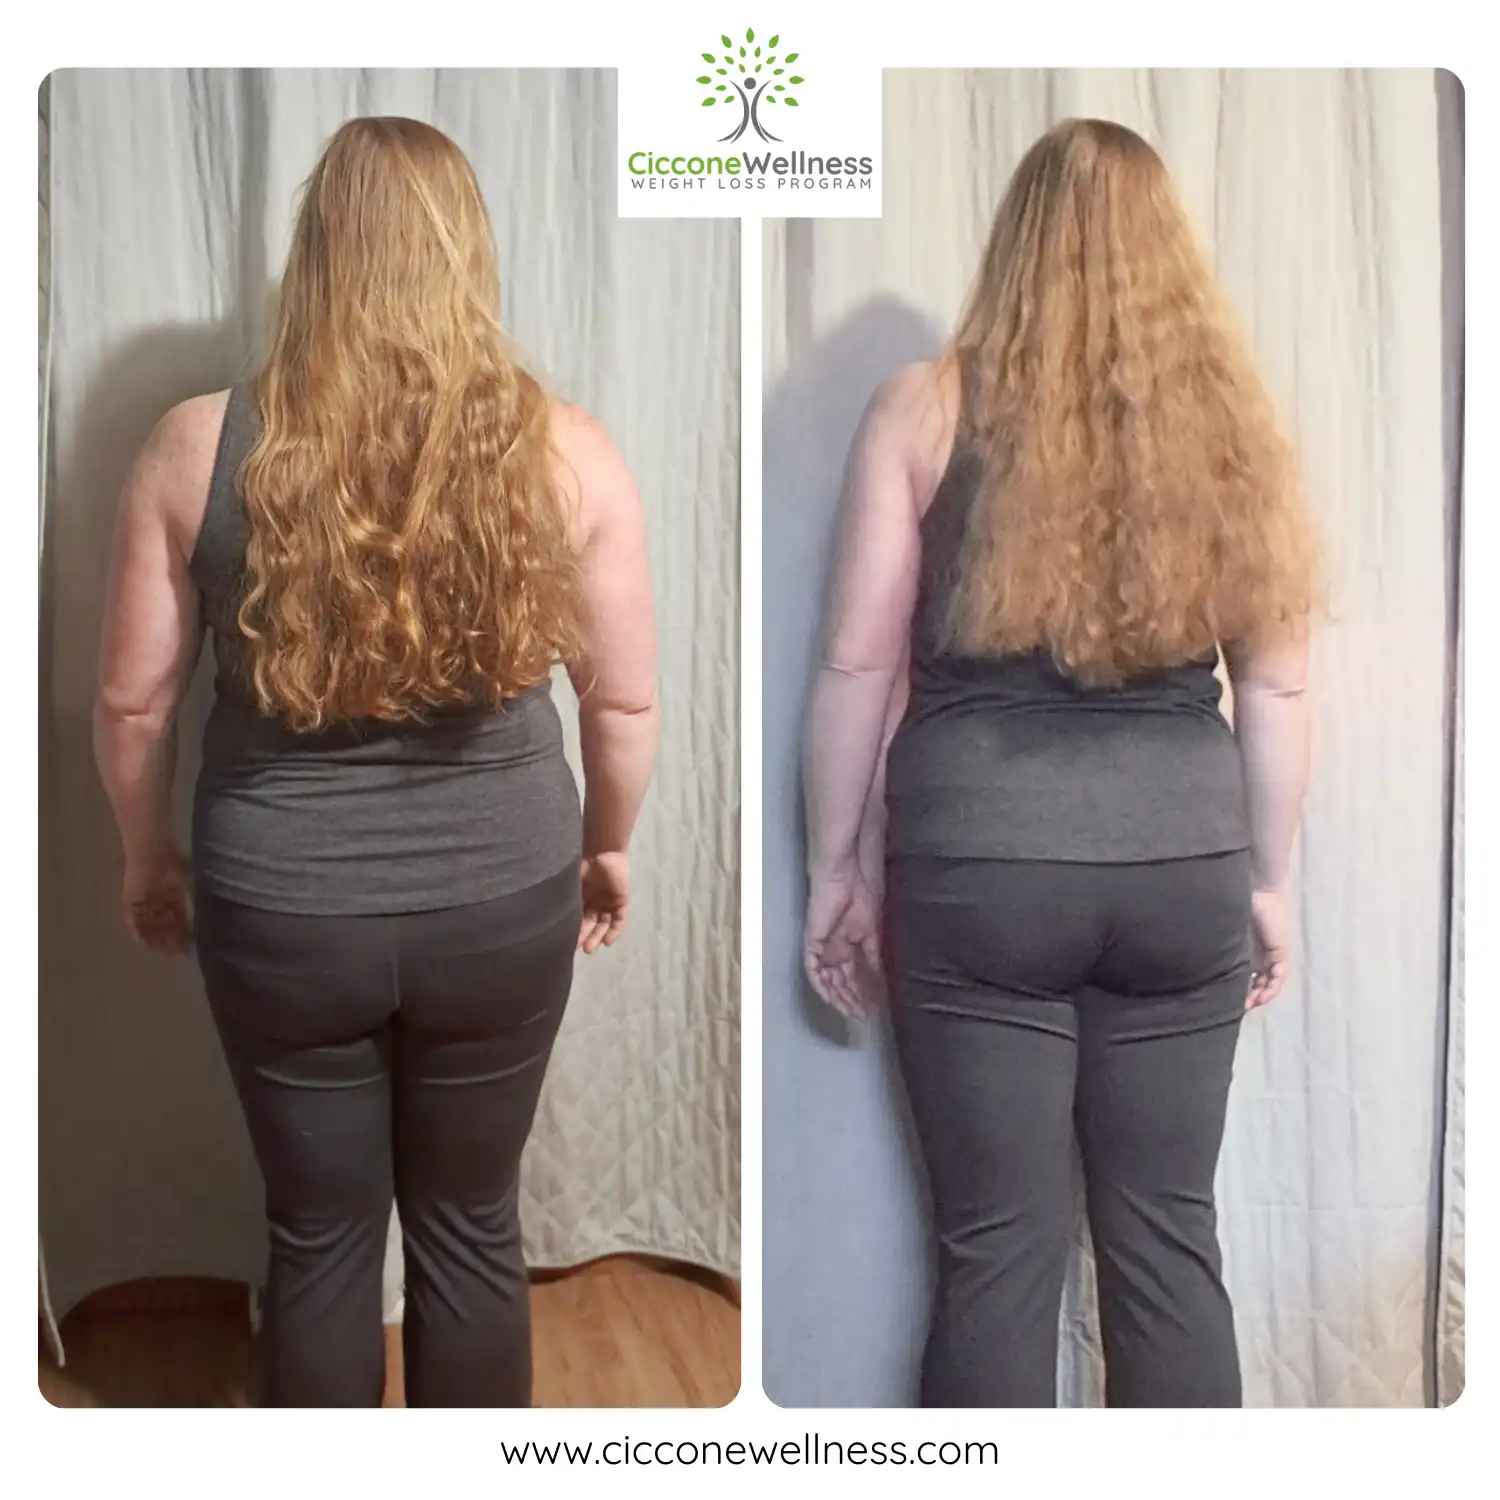 Amanda before and after weight loss back view